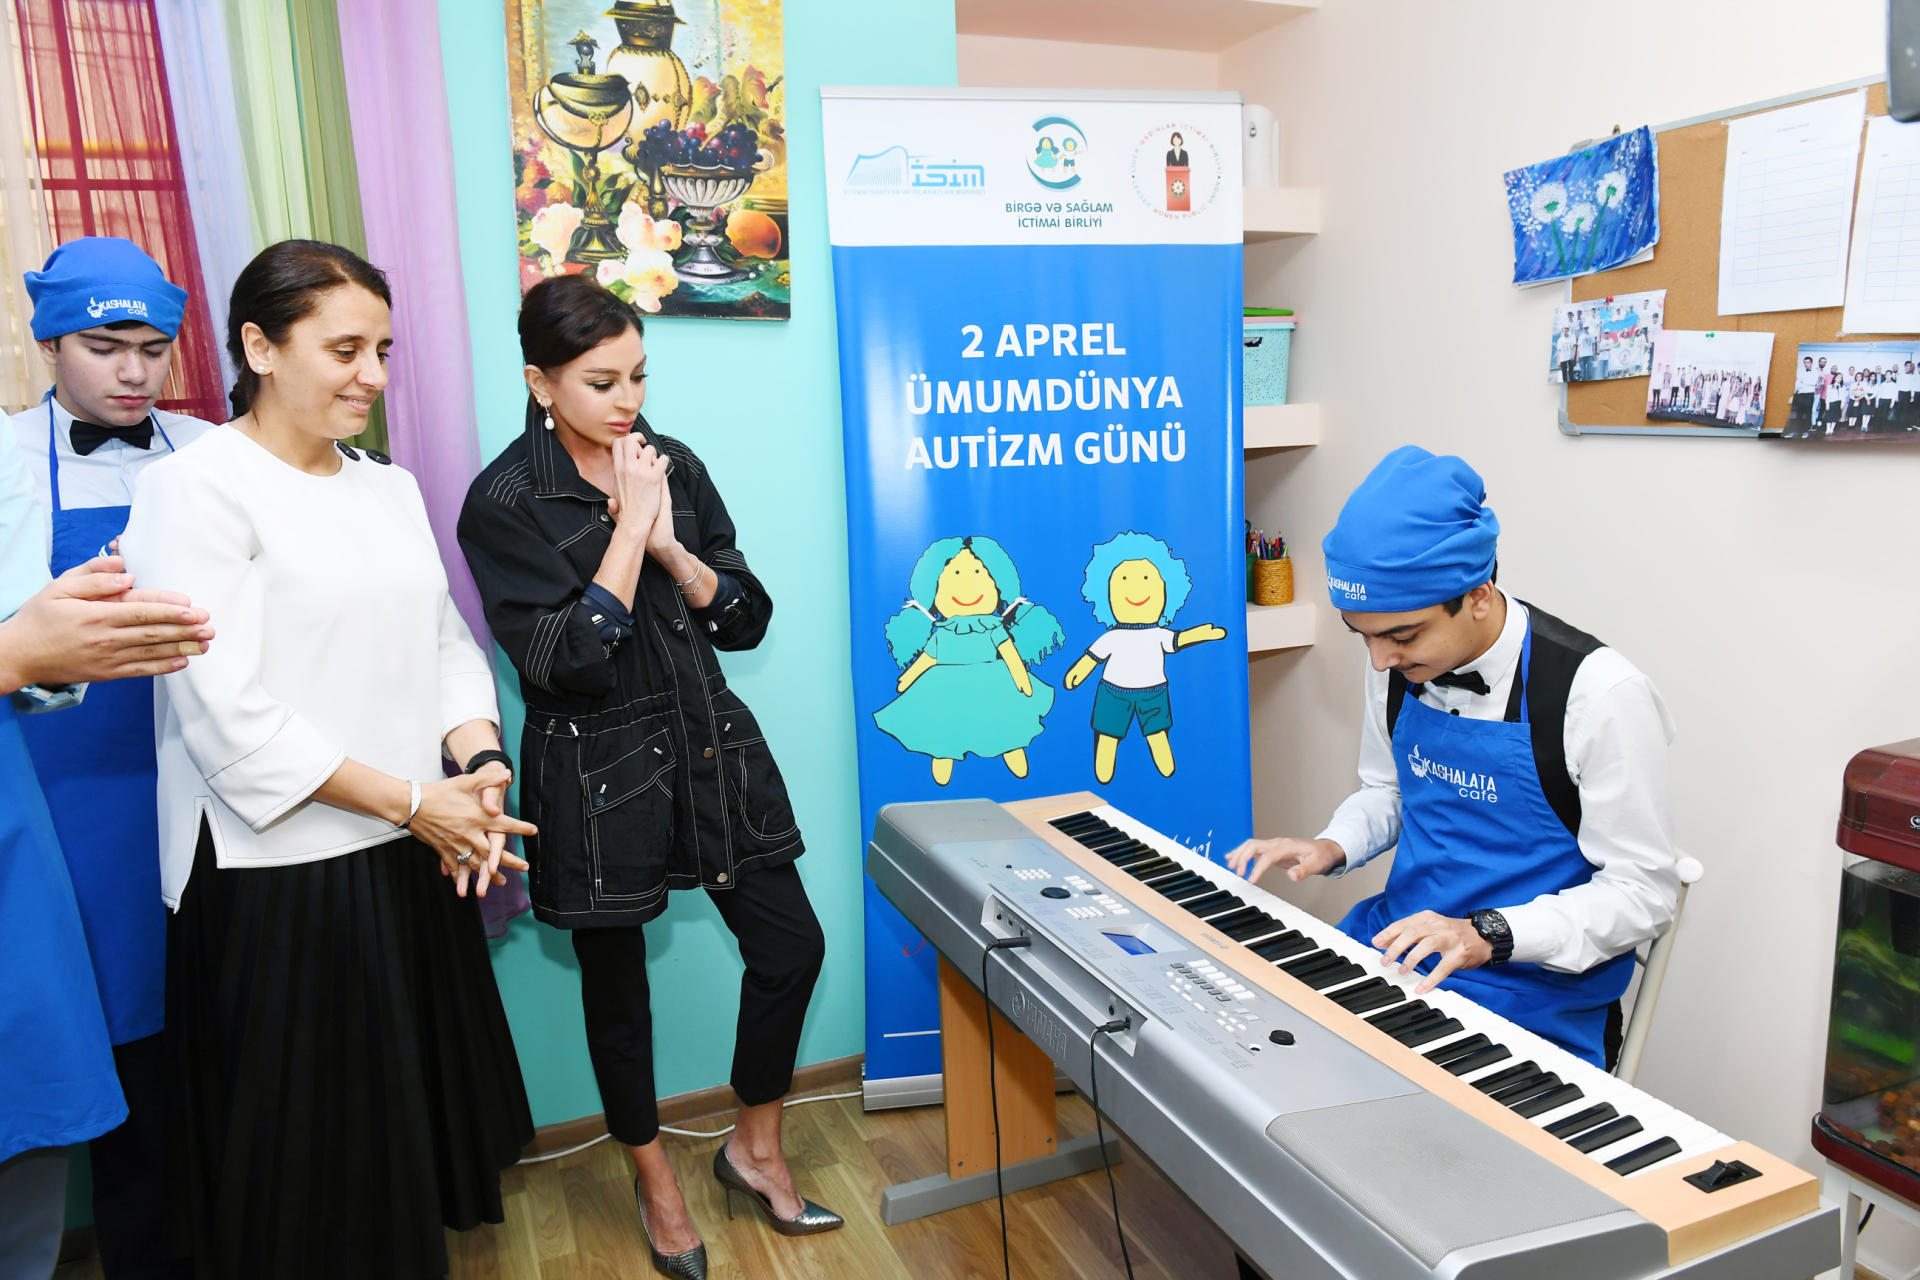 Azerbaijan's First VP visits Rehabilitation Center for children with autism (PHOTO)